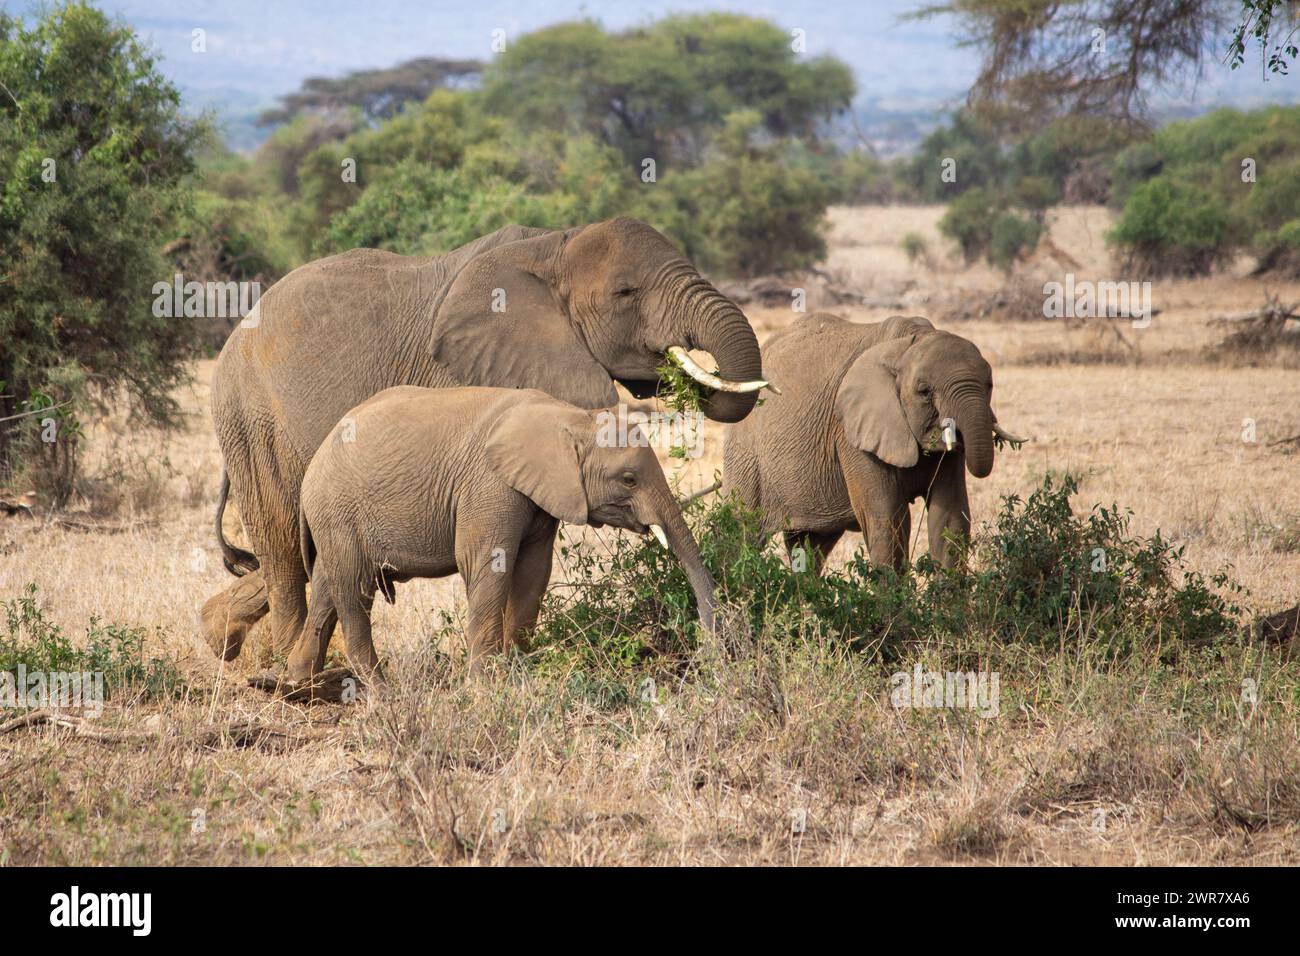 A female African elephant and two calfs grazing in Amboseli National Park, Kenya Stock Photo